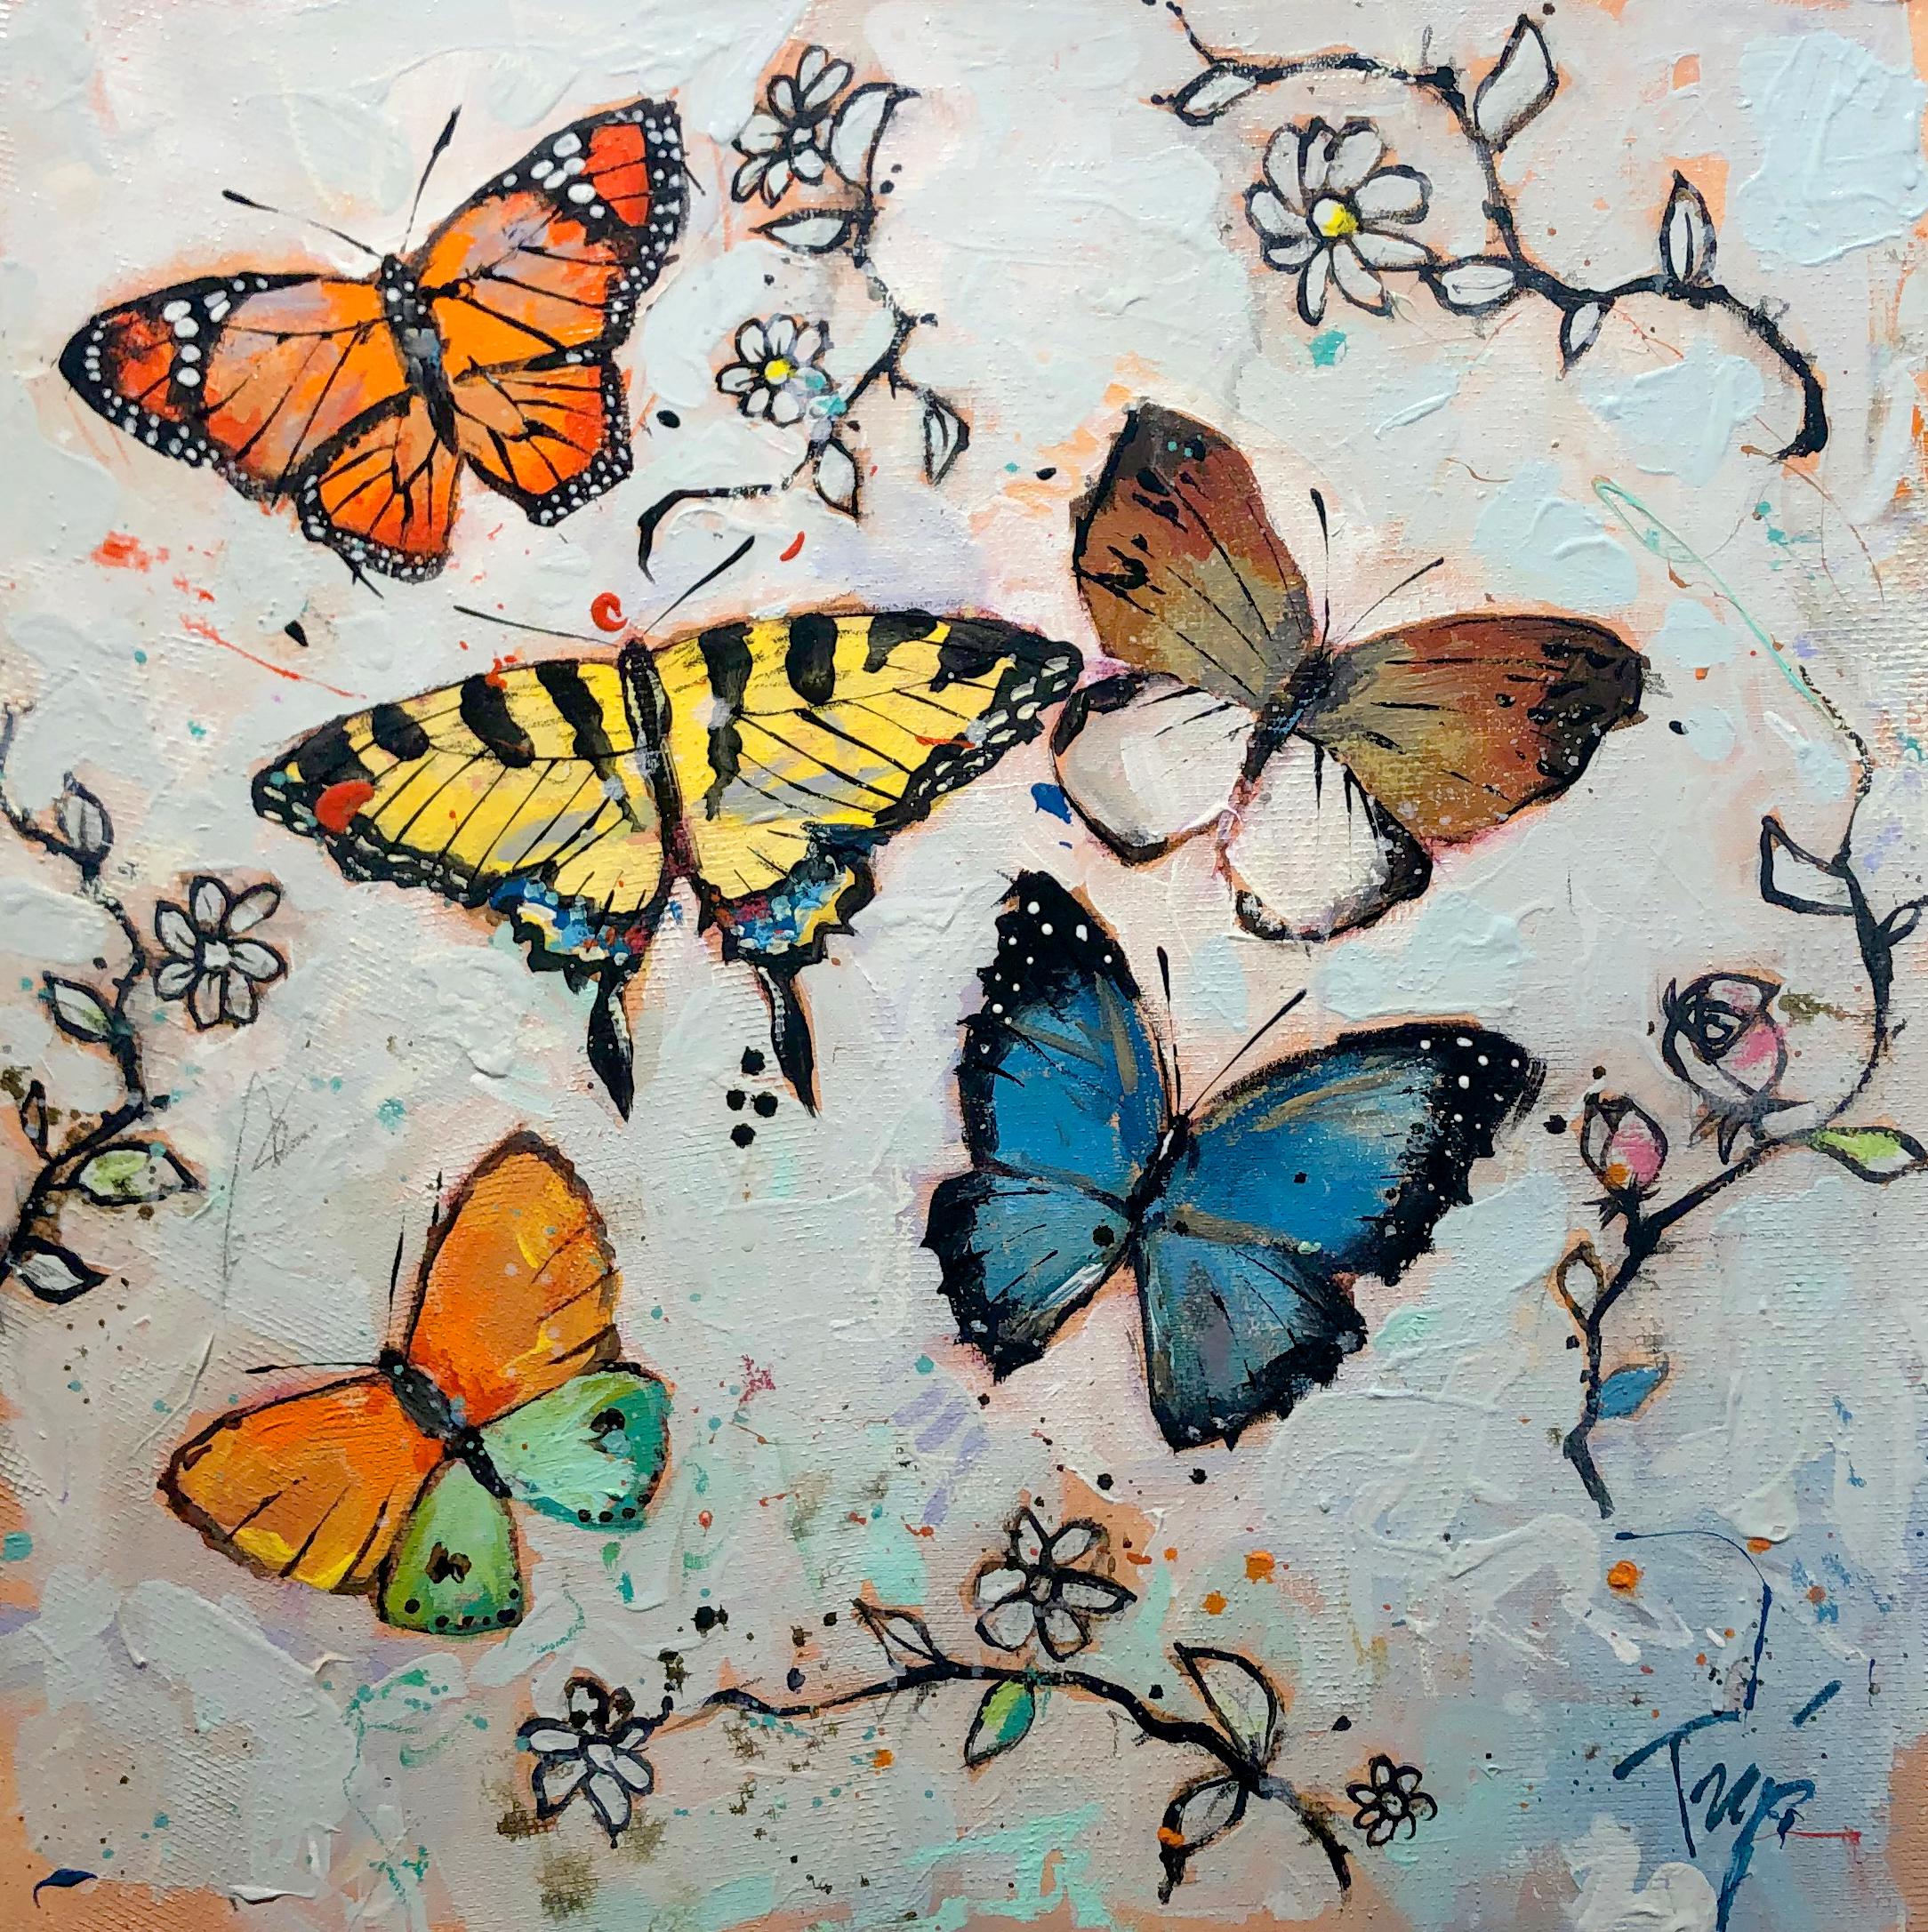 Trip Park, "Hippie Flies", Whimsical Butterfly Floral Oil Painting on Canvas